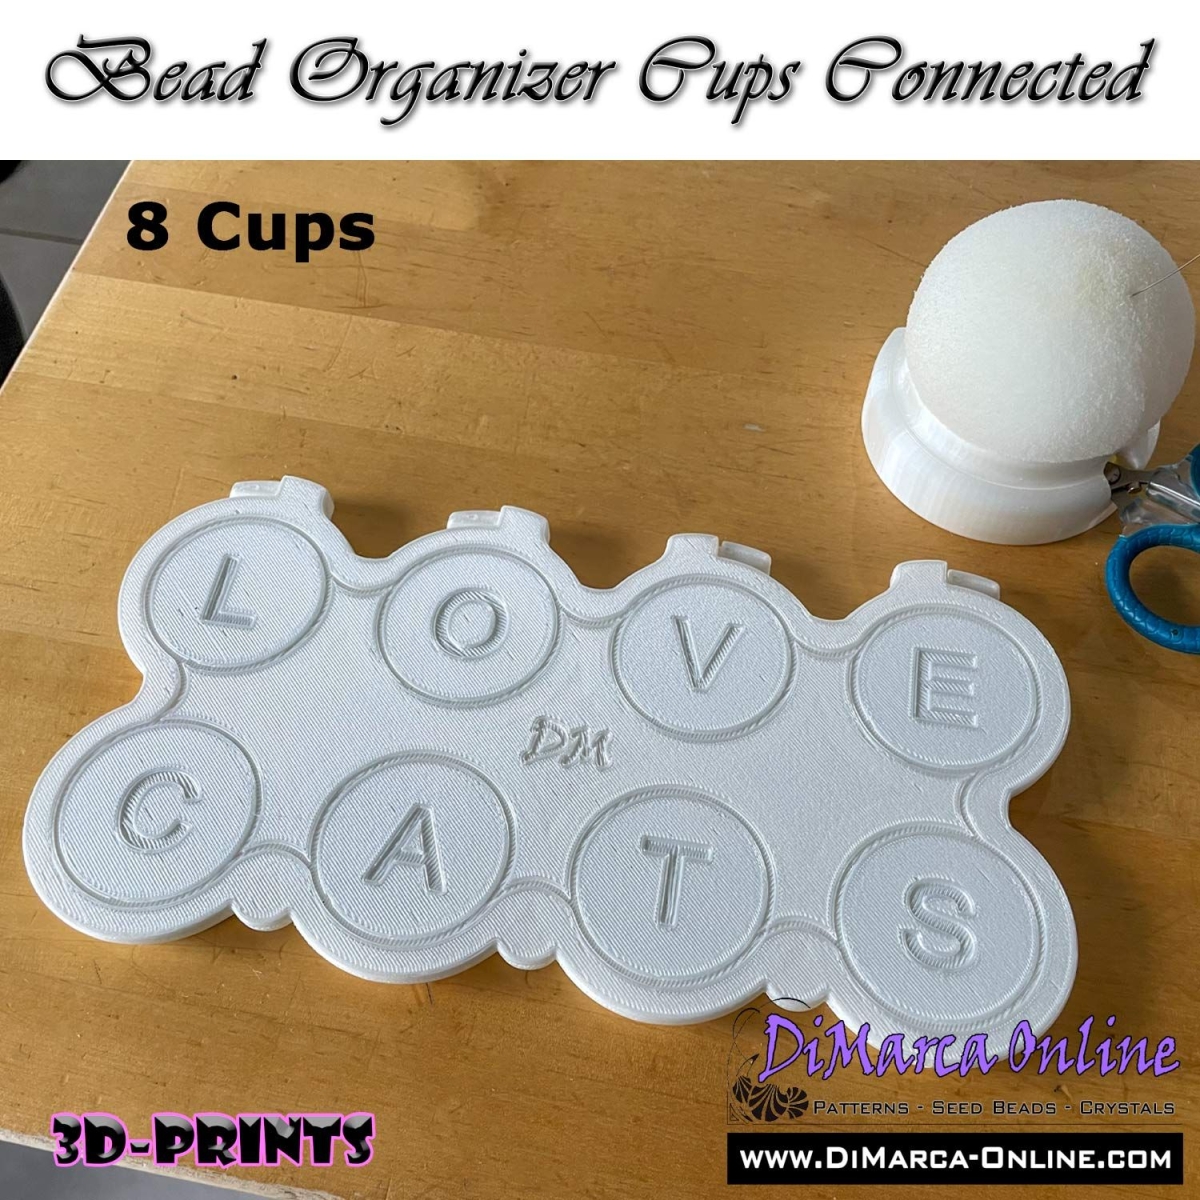 Bead Organizer Cups Connected - 08 Cups - Alphabet, Numbers or